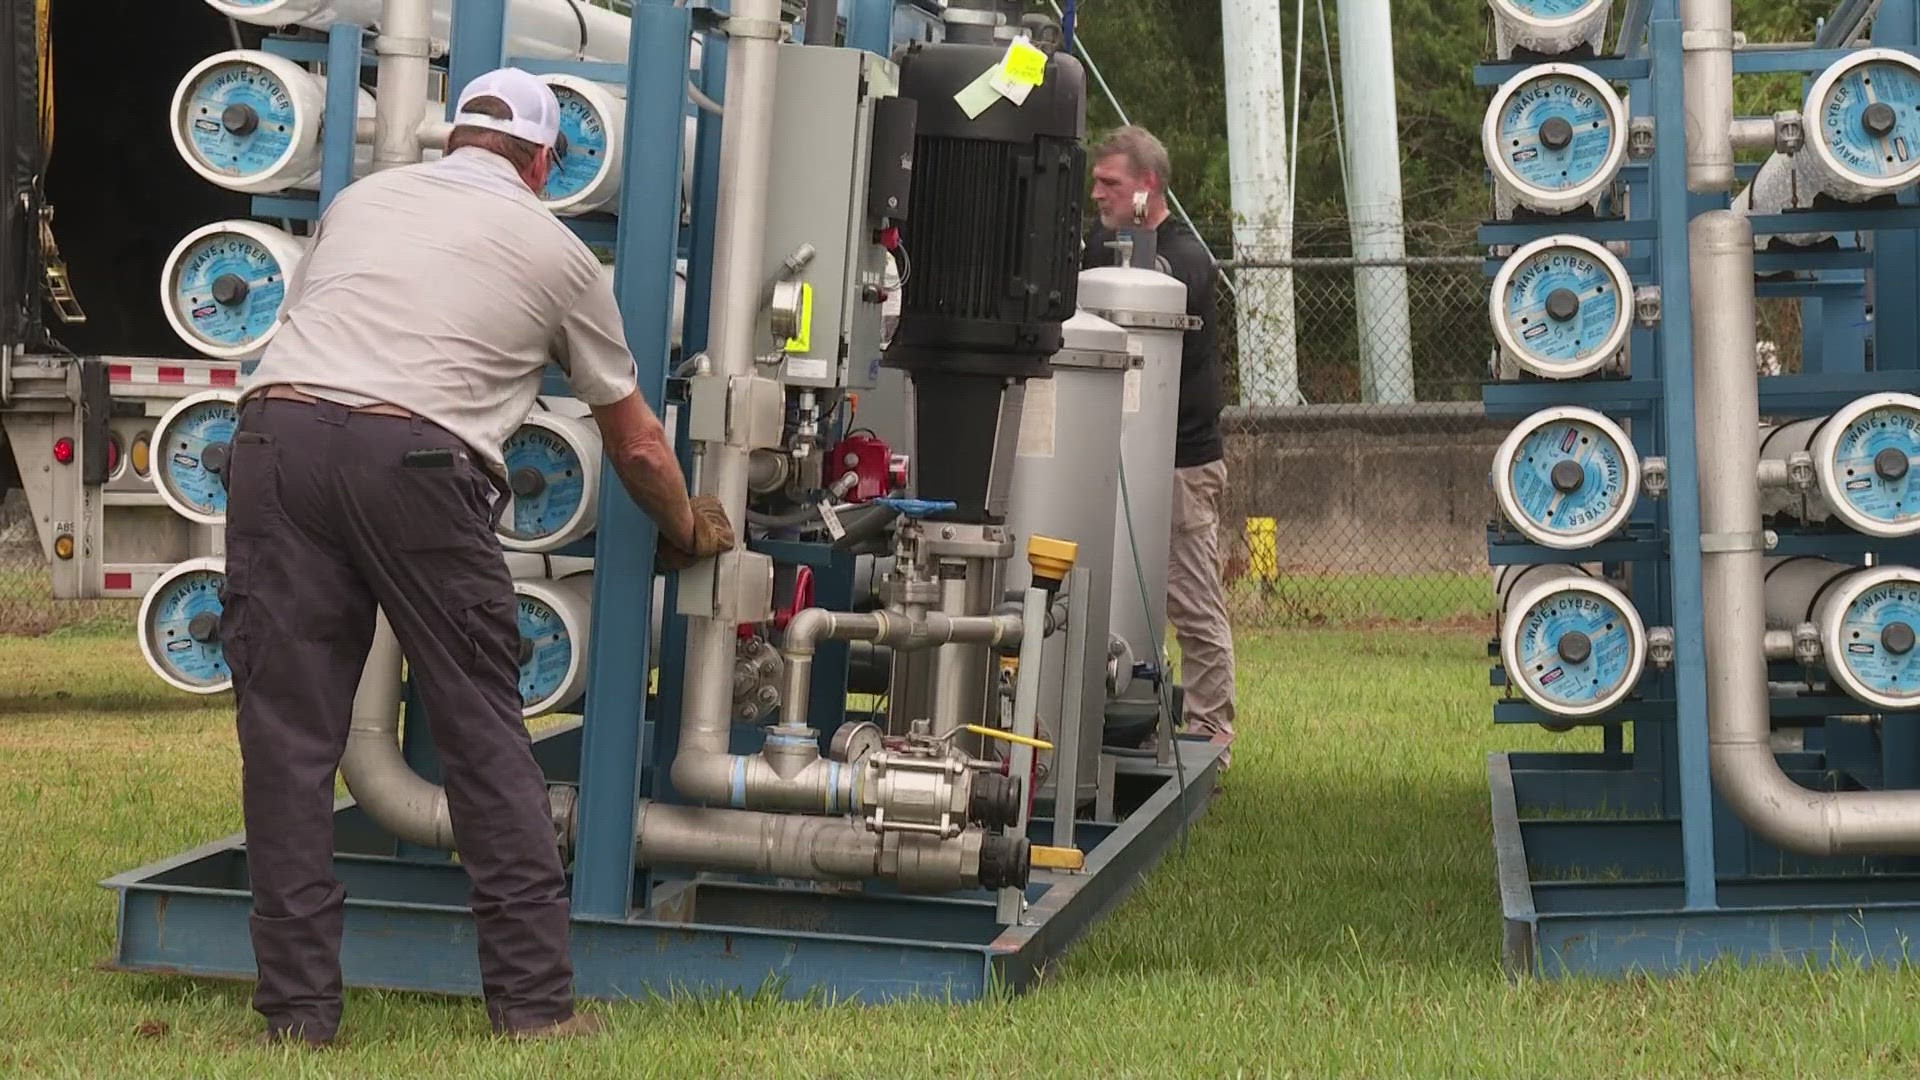 Large reverse osmosis filters arrived Thursday at the Pointe a la Hache water plant on the east bank of Plaquemines Parish